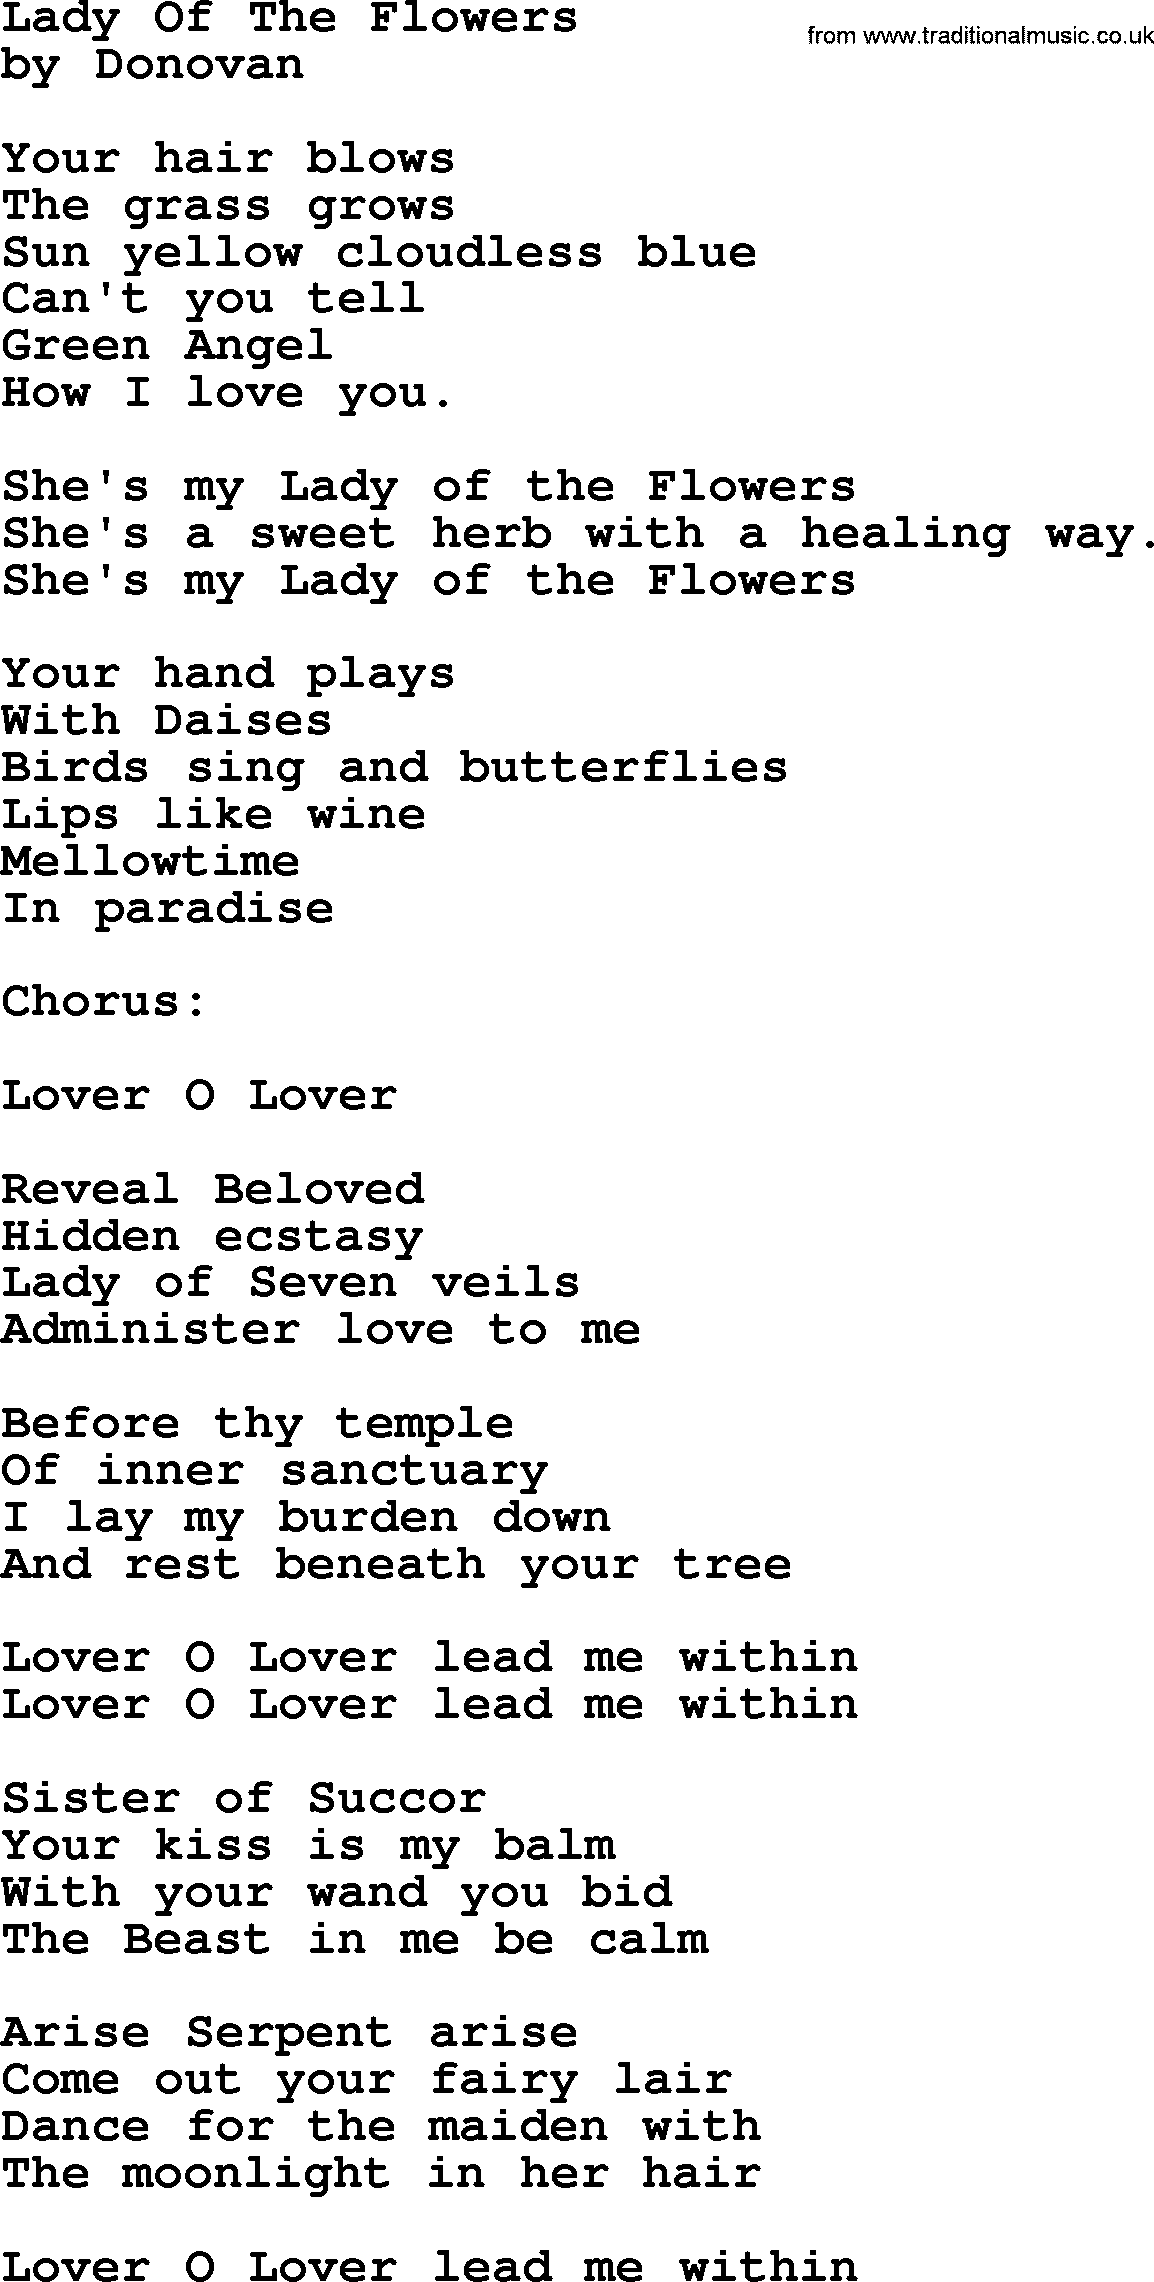 Donovan Leitch song: Lady Of The Flowers lyrics